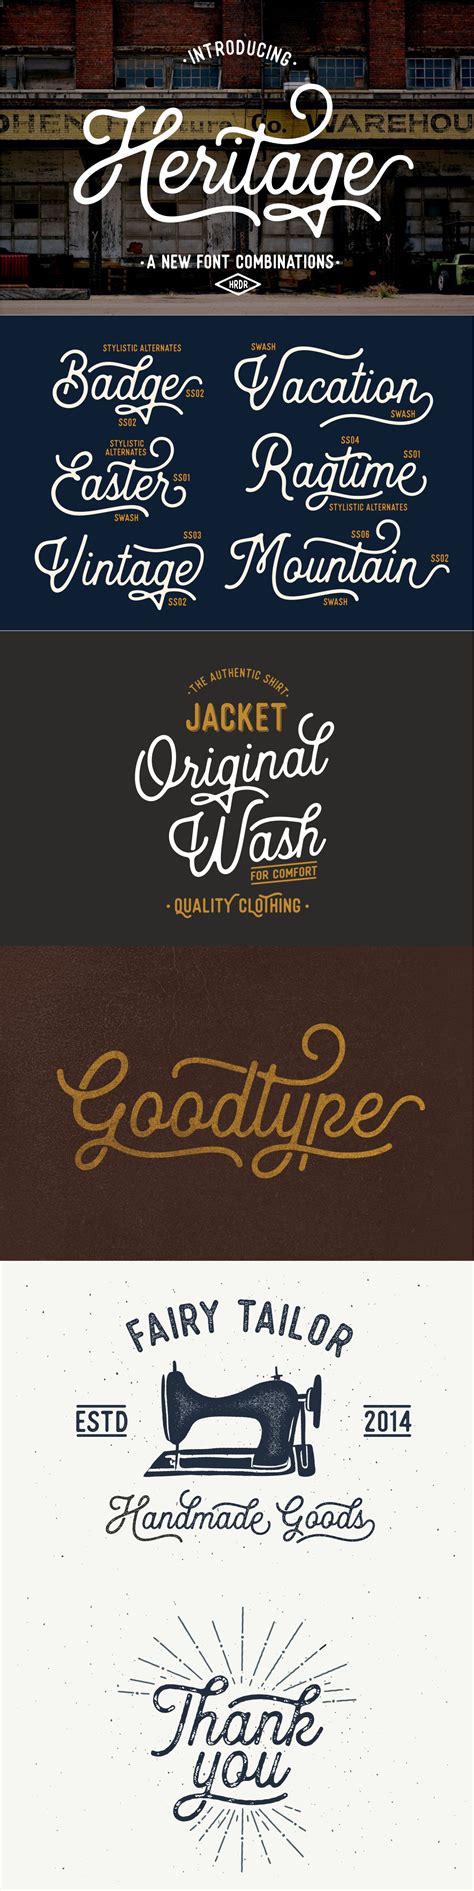 Heritage Font Combinations Font Combinations Logo Fonts Vintage My